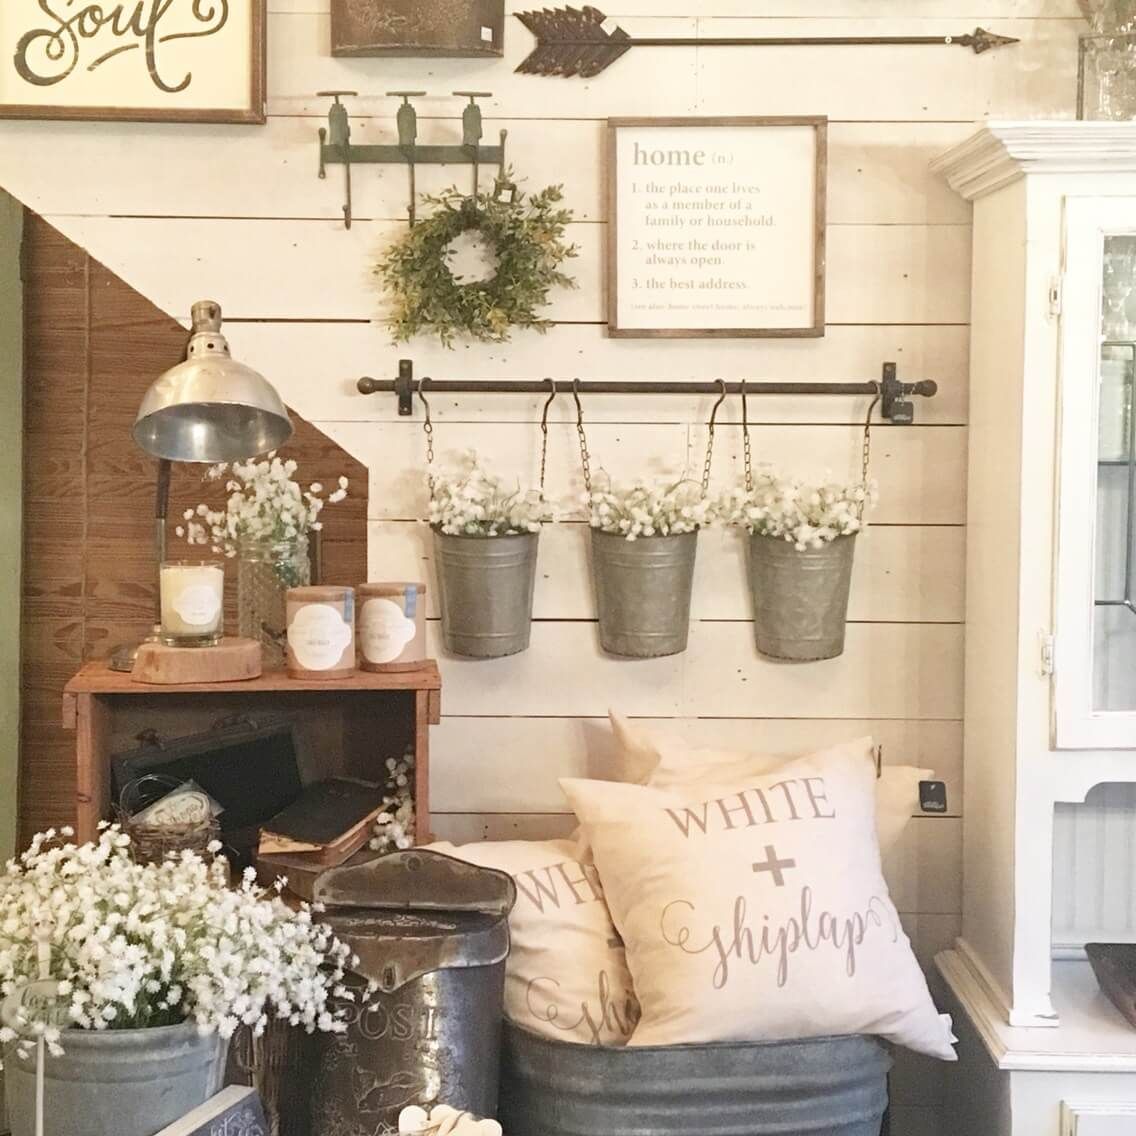 45+ Best Farmhouse Wall Decor Ideas And Designs For 2019 Throughout Floral Patterned Over The Door Wall Decor (View 25 of 30)